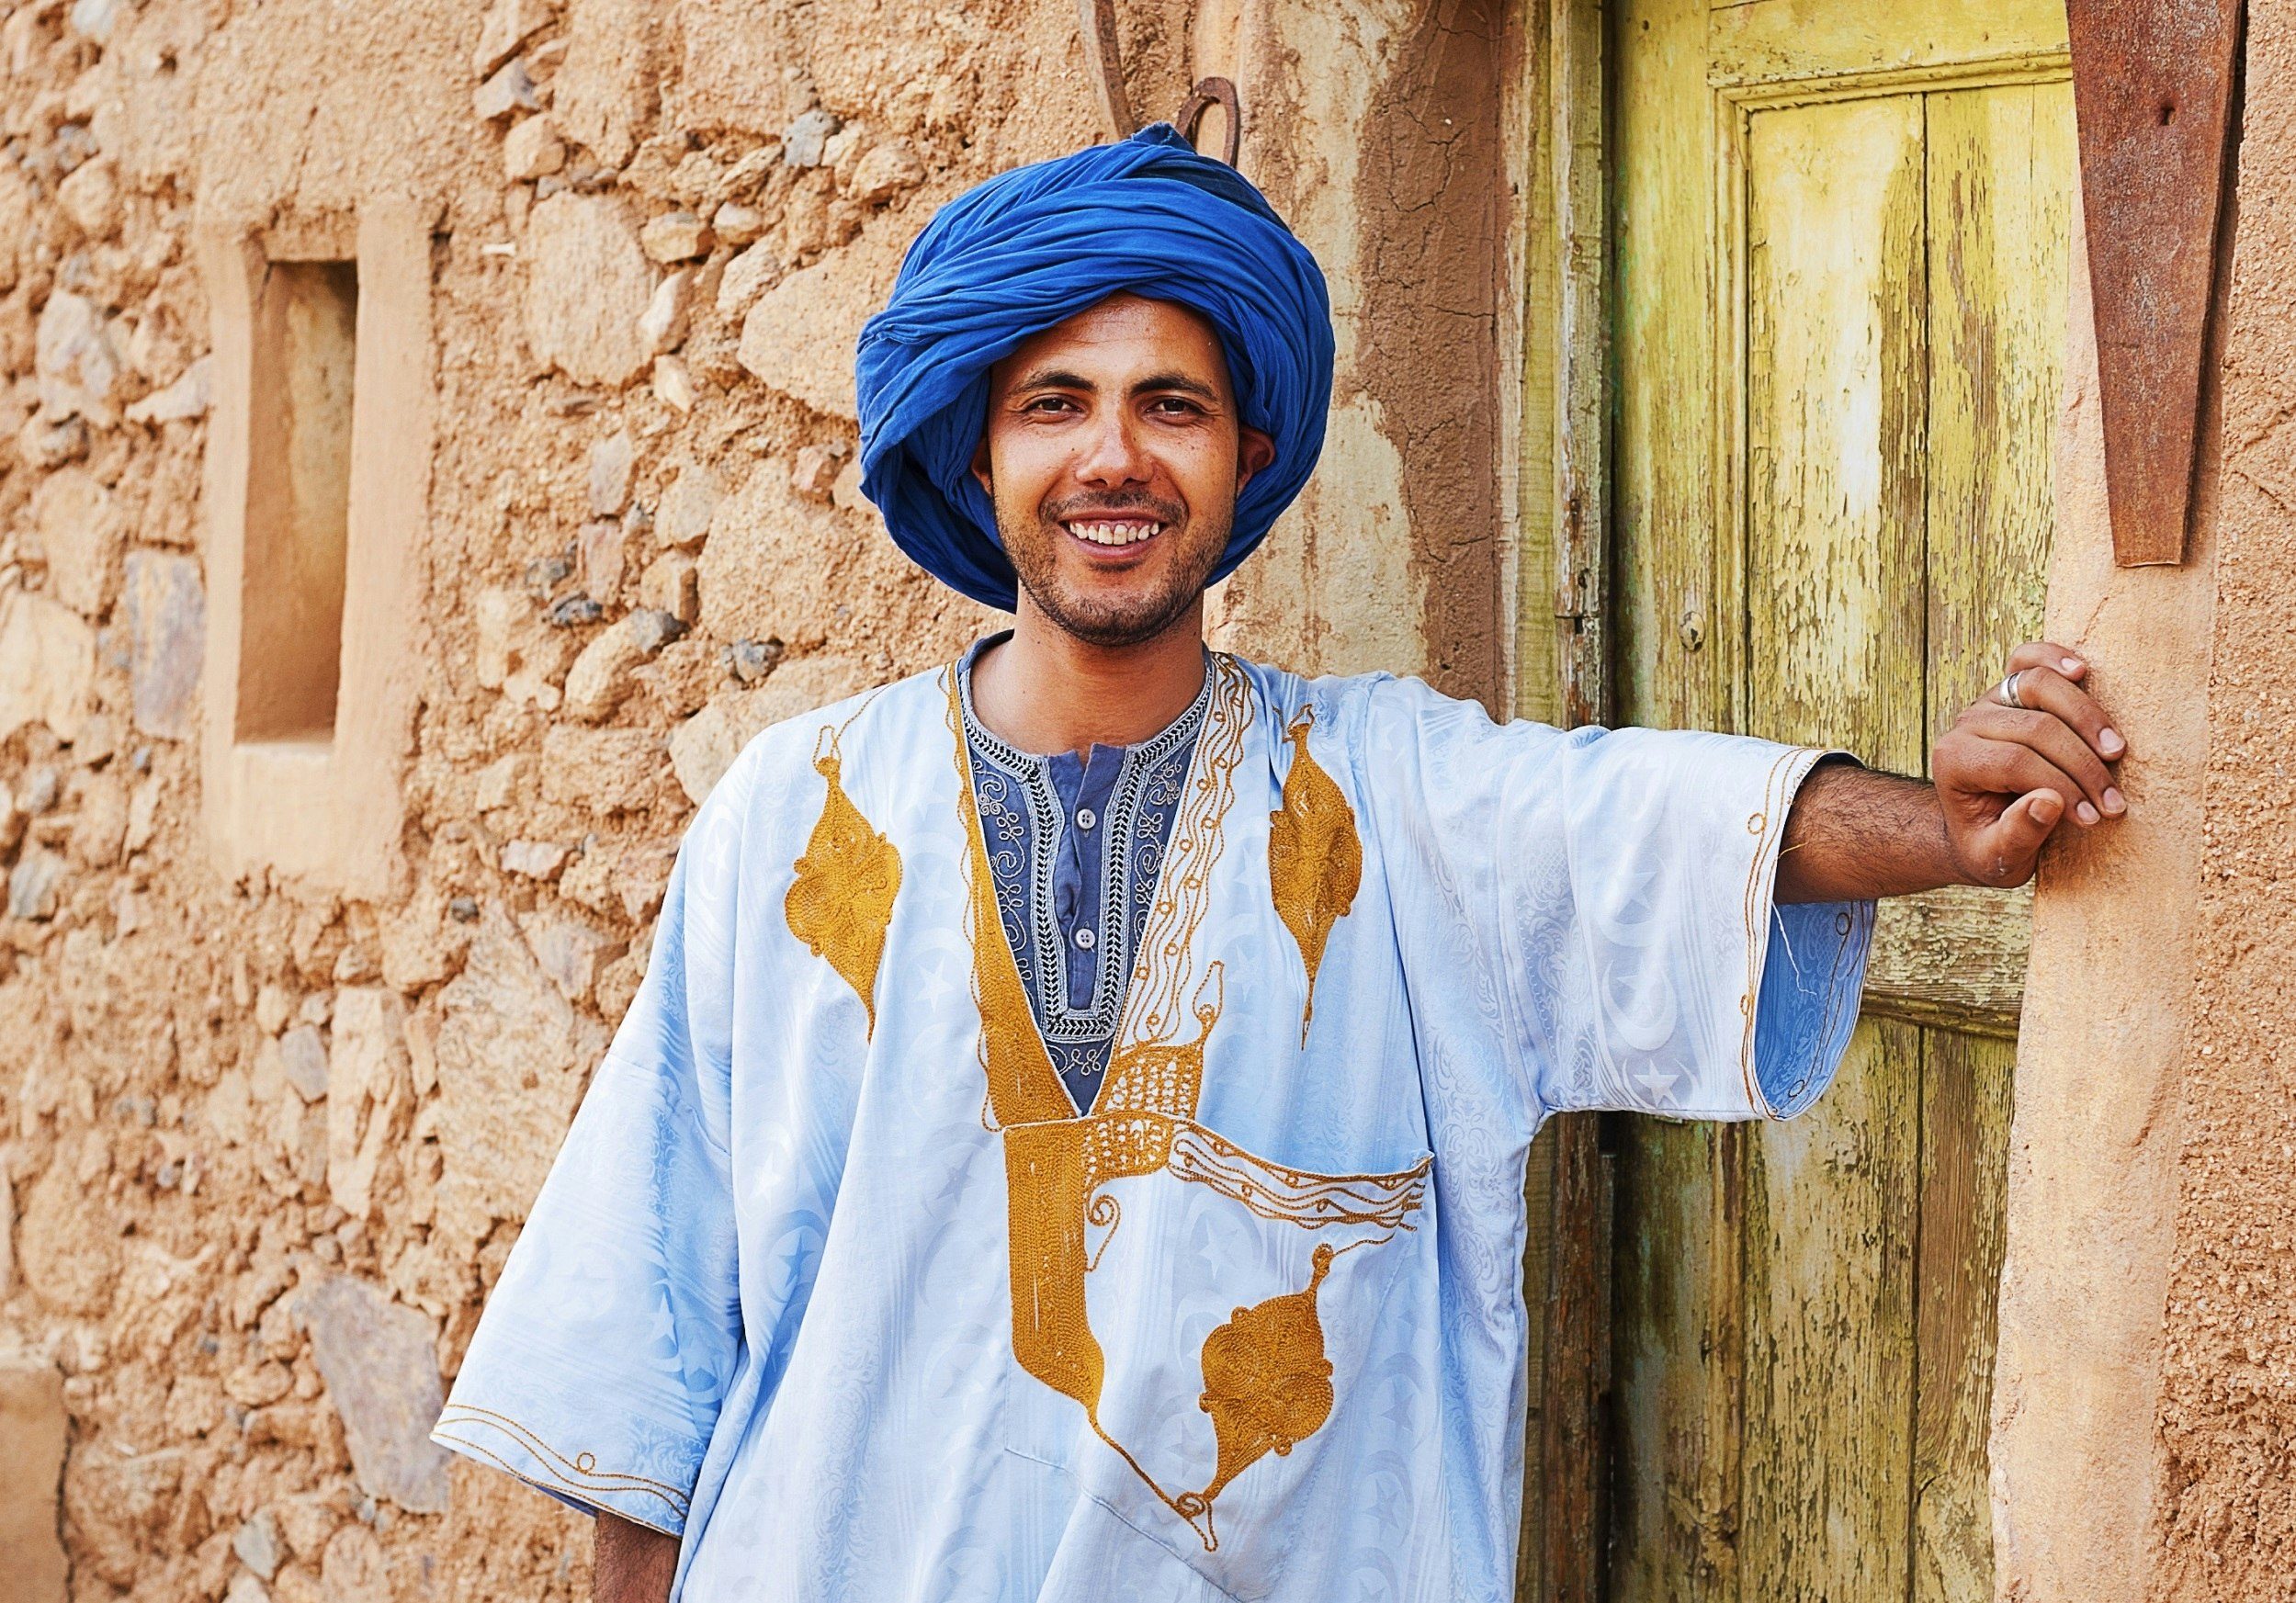 A Berber man, with indigo head scarf and light blue and gold robe stands smiling in front of a pinkish stone building.